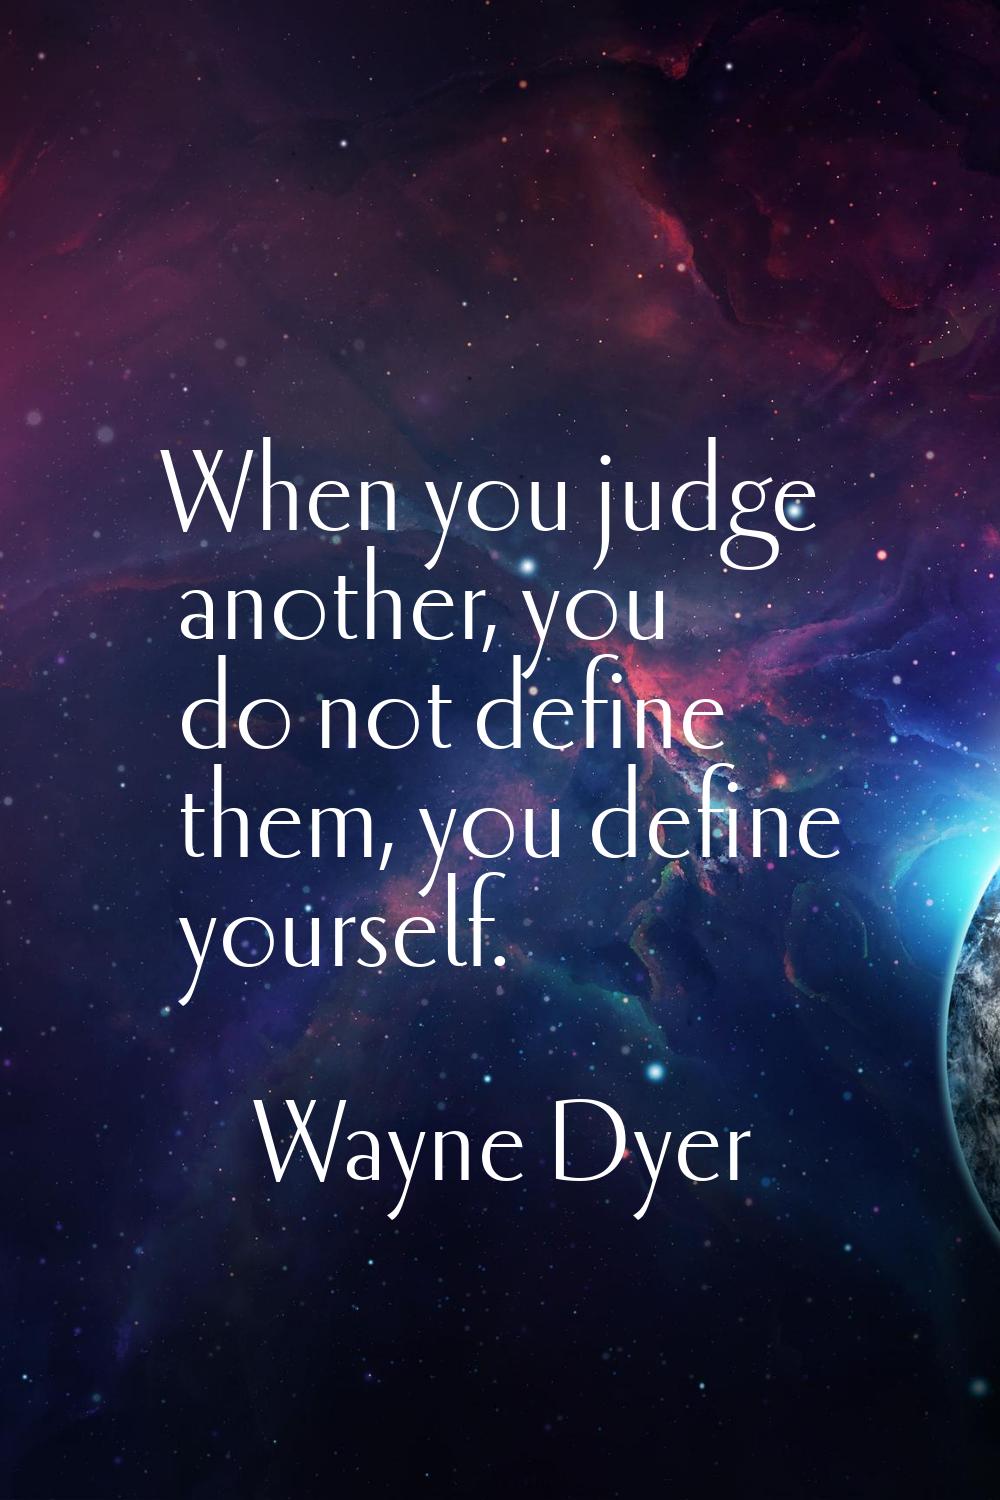 When you judge another, you do not define them, you define yourself.